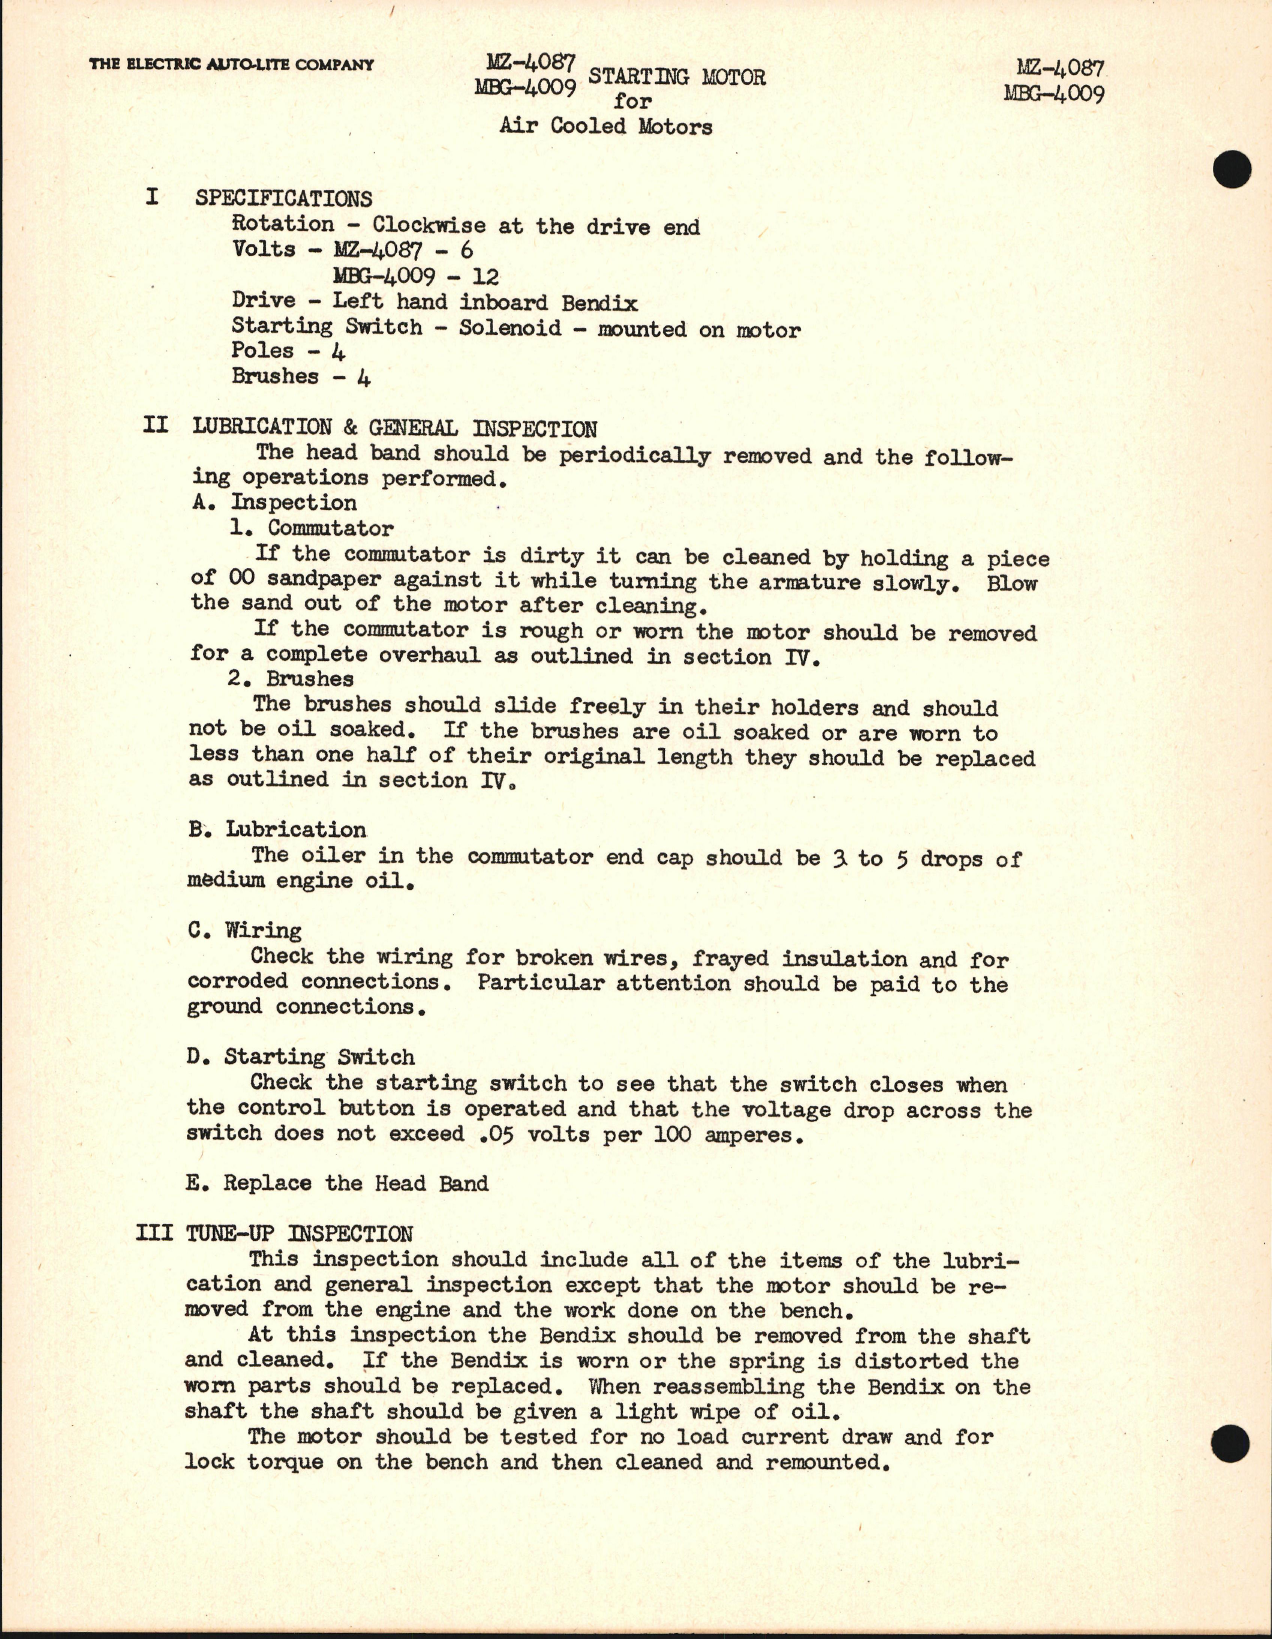 Sample page 1 from AirCorps Library document: Starting Motor for Air Cooled Motors, Part No. MZ-4087 and MBG-4009